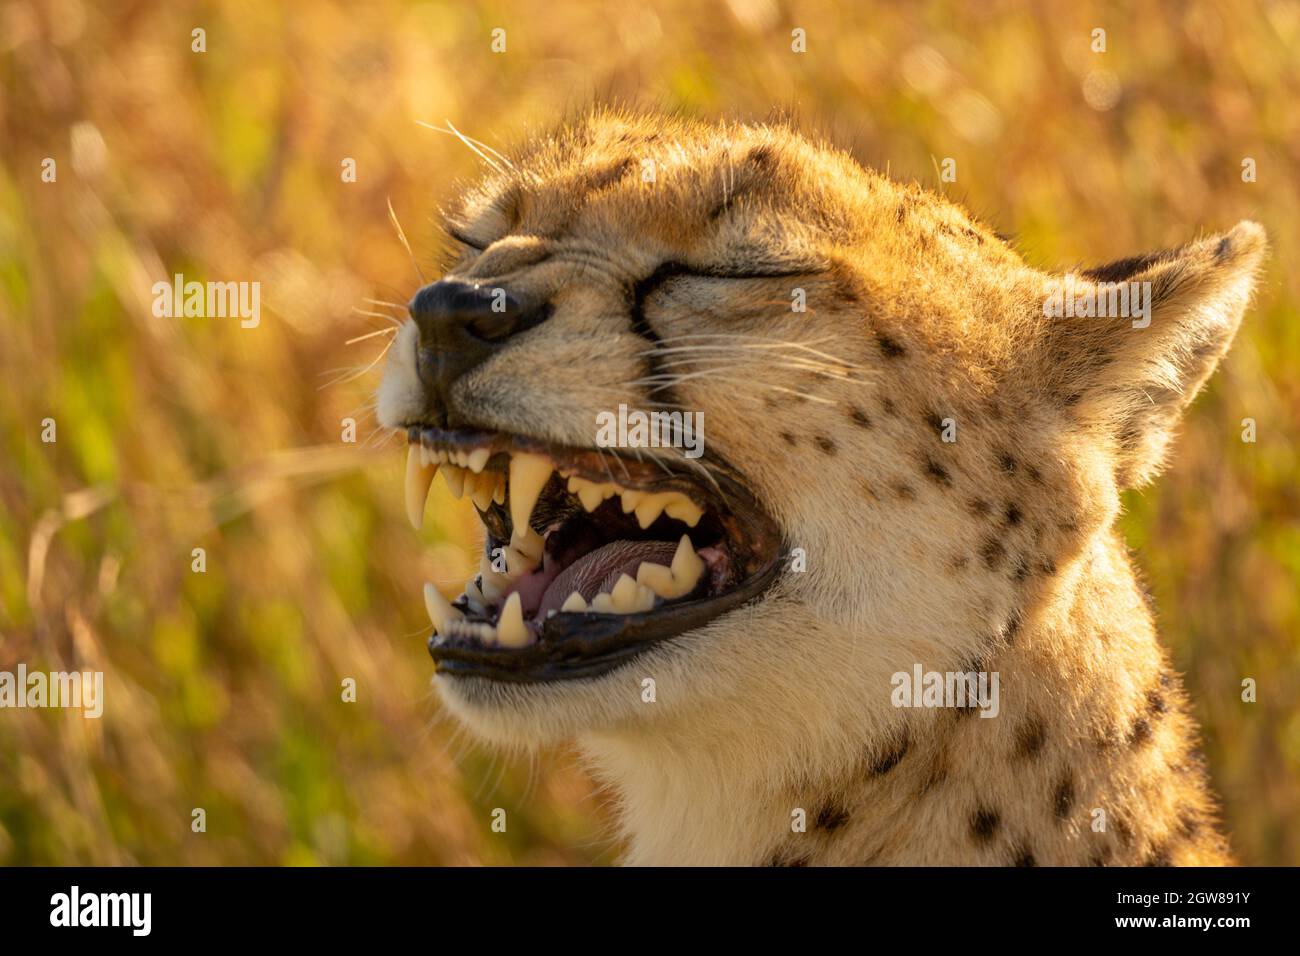 Close-up Of Backlit Cheetah Yawning In Grass Stock Photo